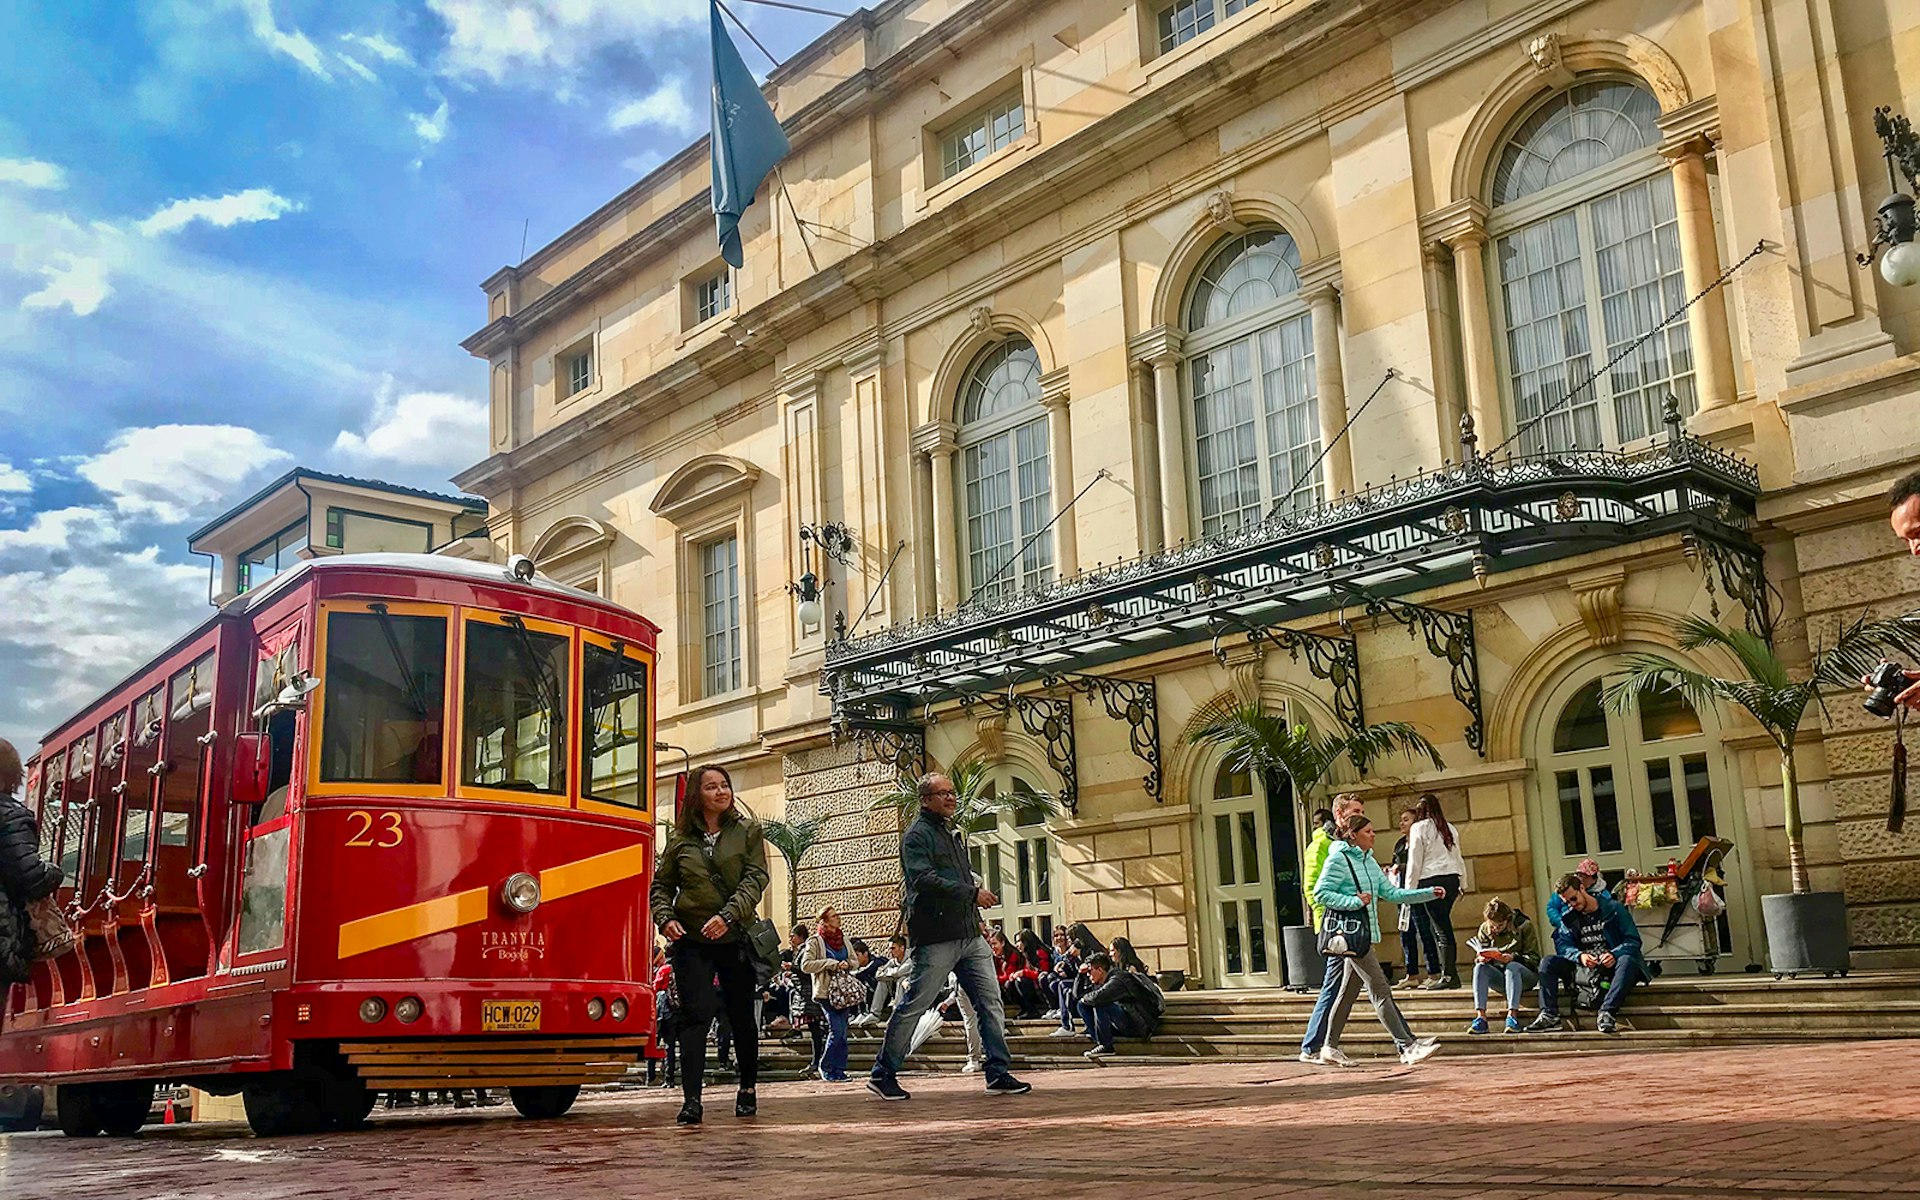 A red tram passes in front of the golden stone facade of the Teatro Colón in Bogota on a sunny day © Jacqui de Klerk / Lonely Planet